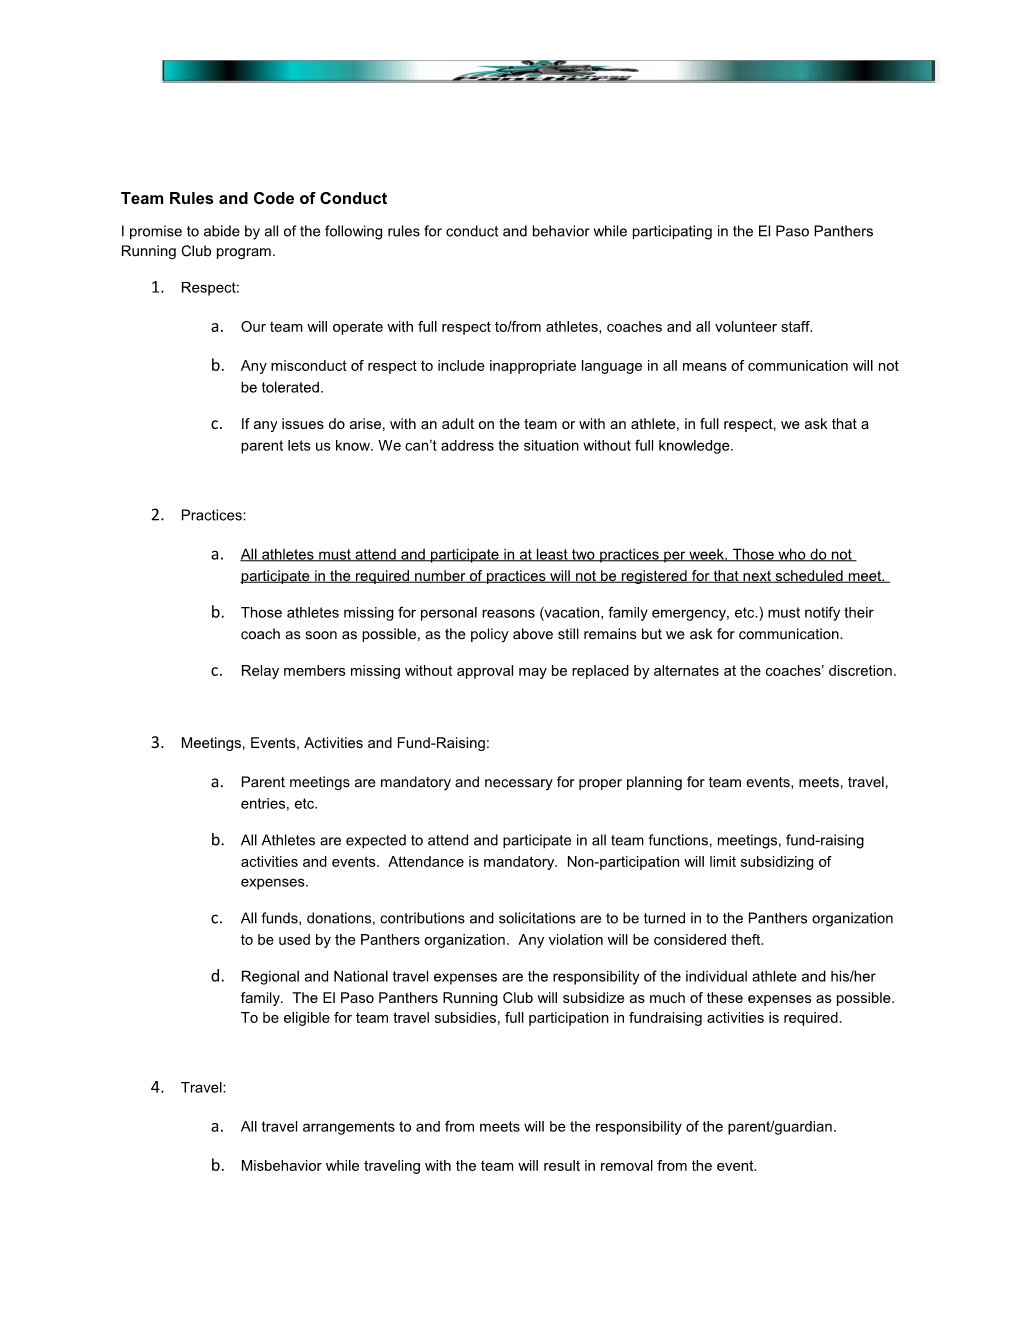 Team Rules and Code of Conduct